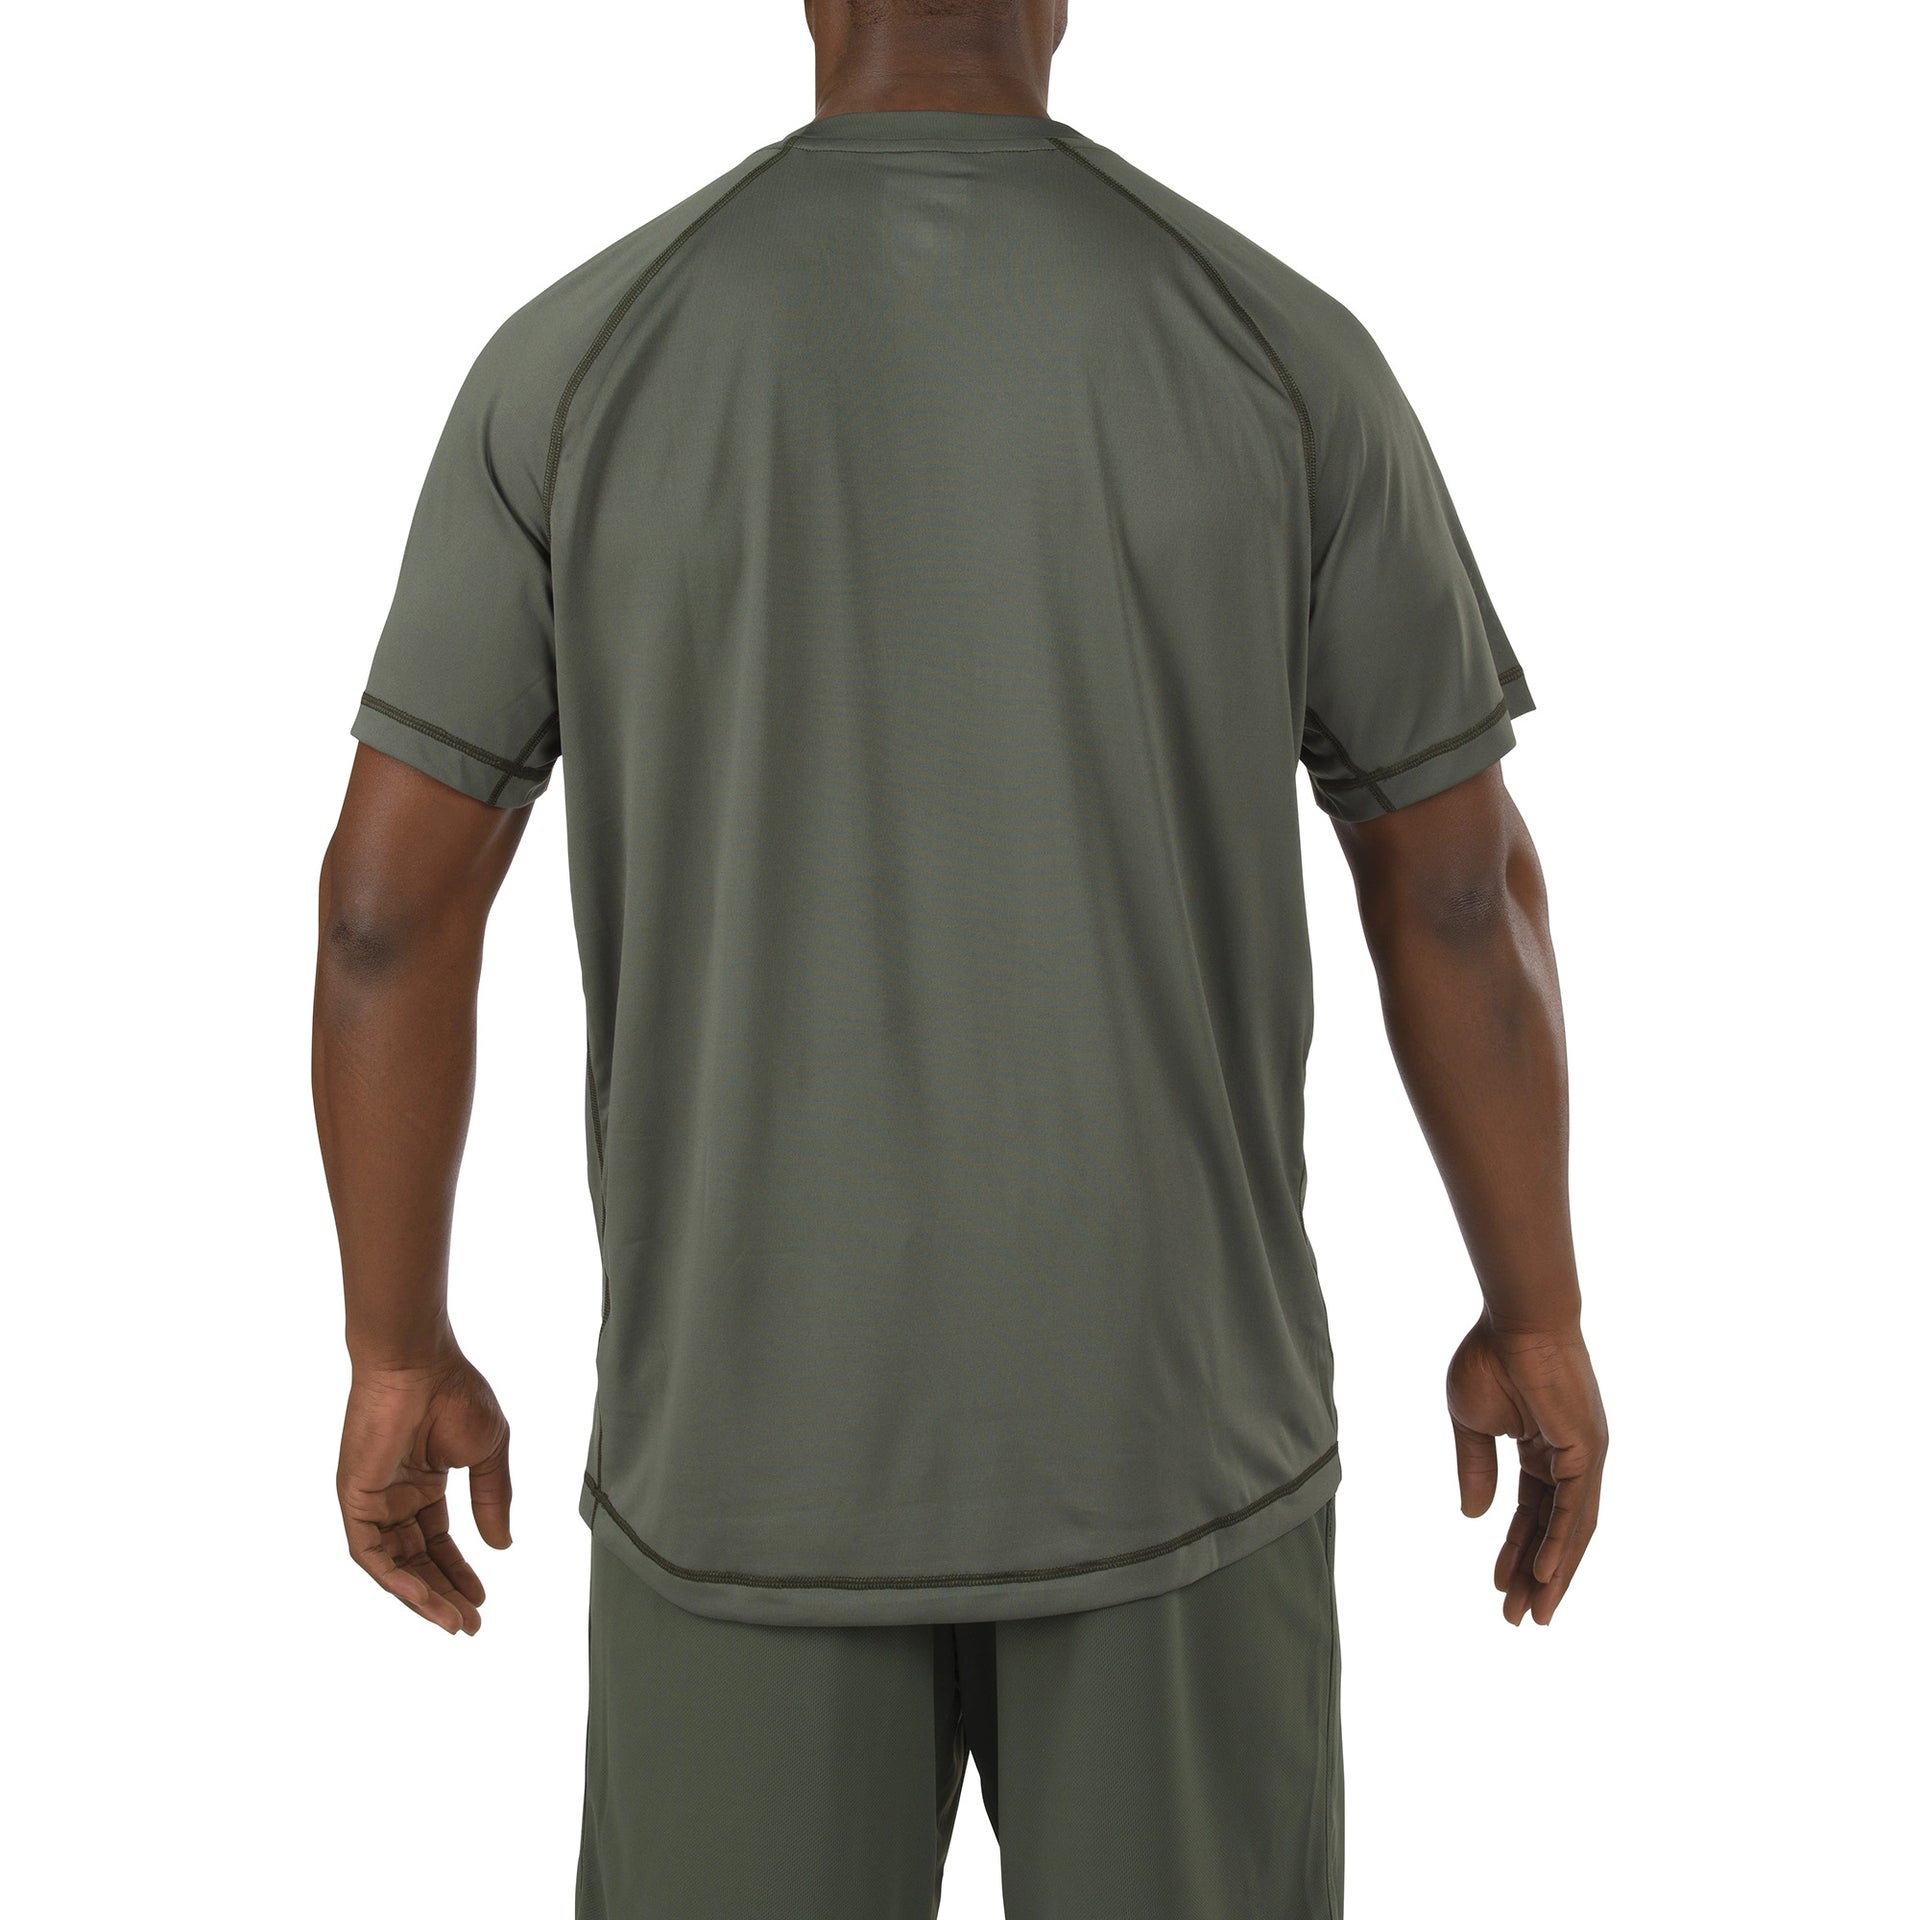 5.11 Tactical Utility PT Shirt (41017) | The Fire Center | Fuego Fire Center | An efficient, effective PT shirt for any climate or setting, made to maximize your training regimen. Crafted from a lightweight, breathable fabric, the Utility PT Shirt features an odor control, moisture-wicking finish, raglan sleeves, and fully gusseted underarms. 